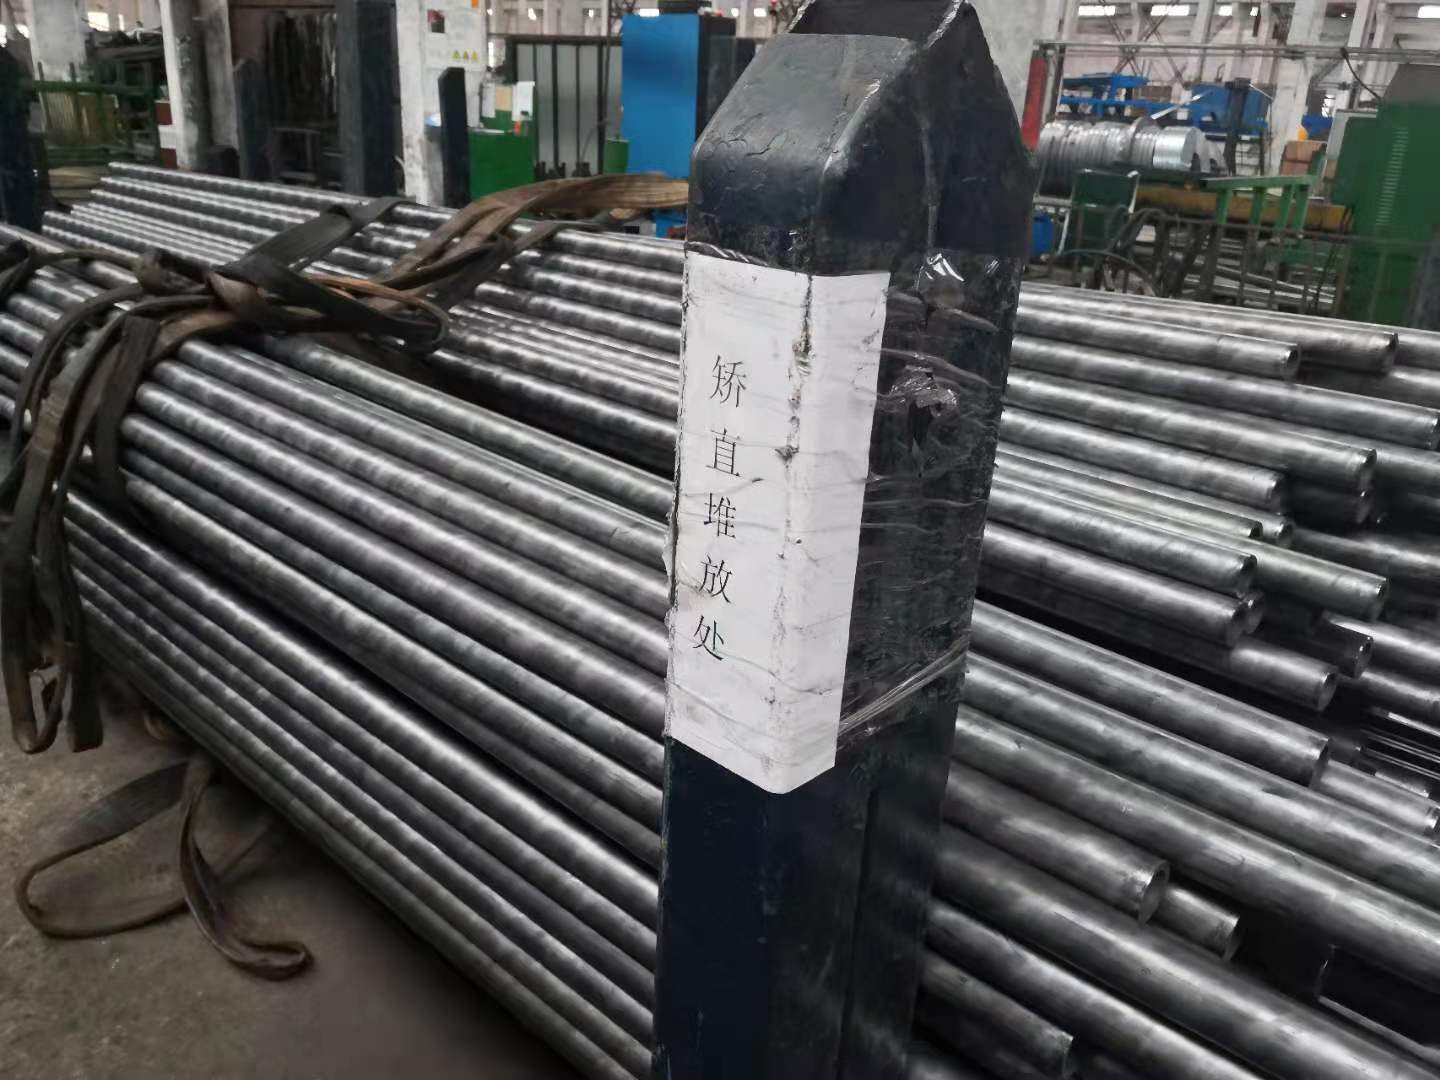 The classification and application of the stainless steel pipe